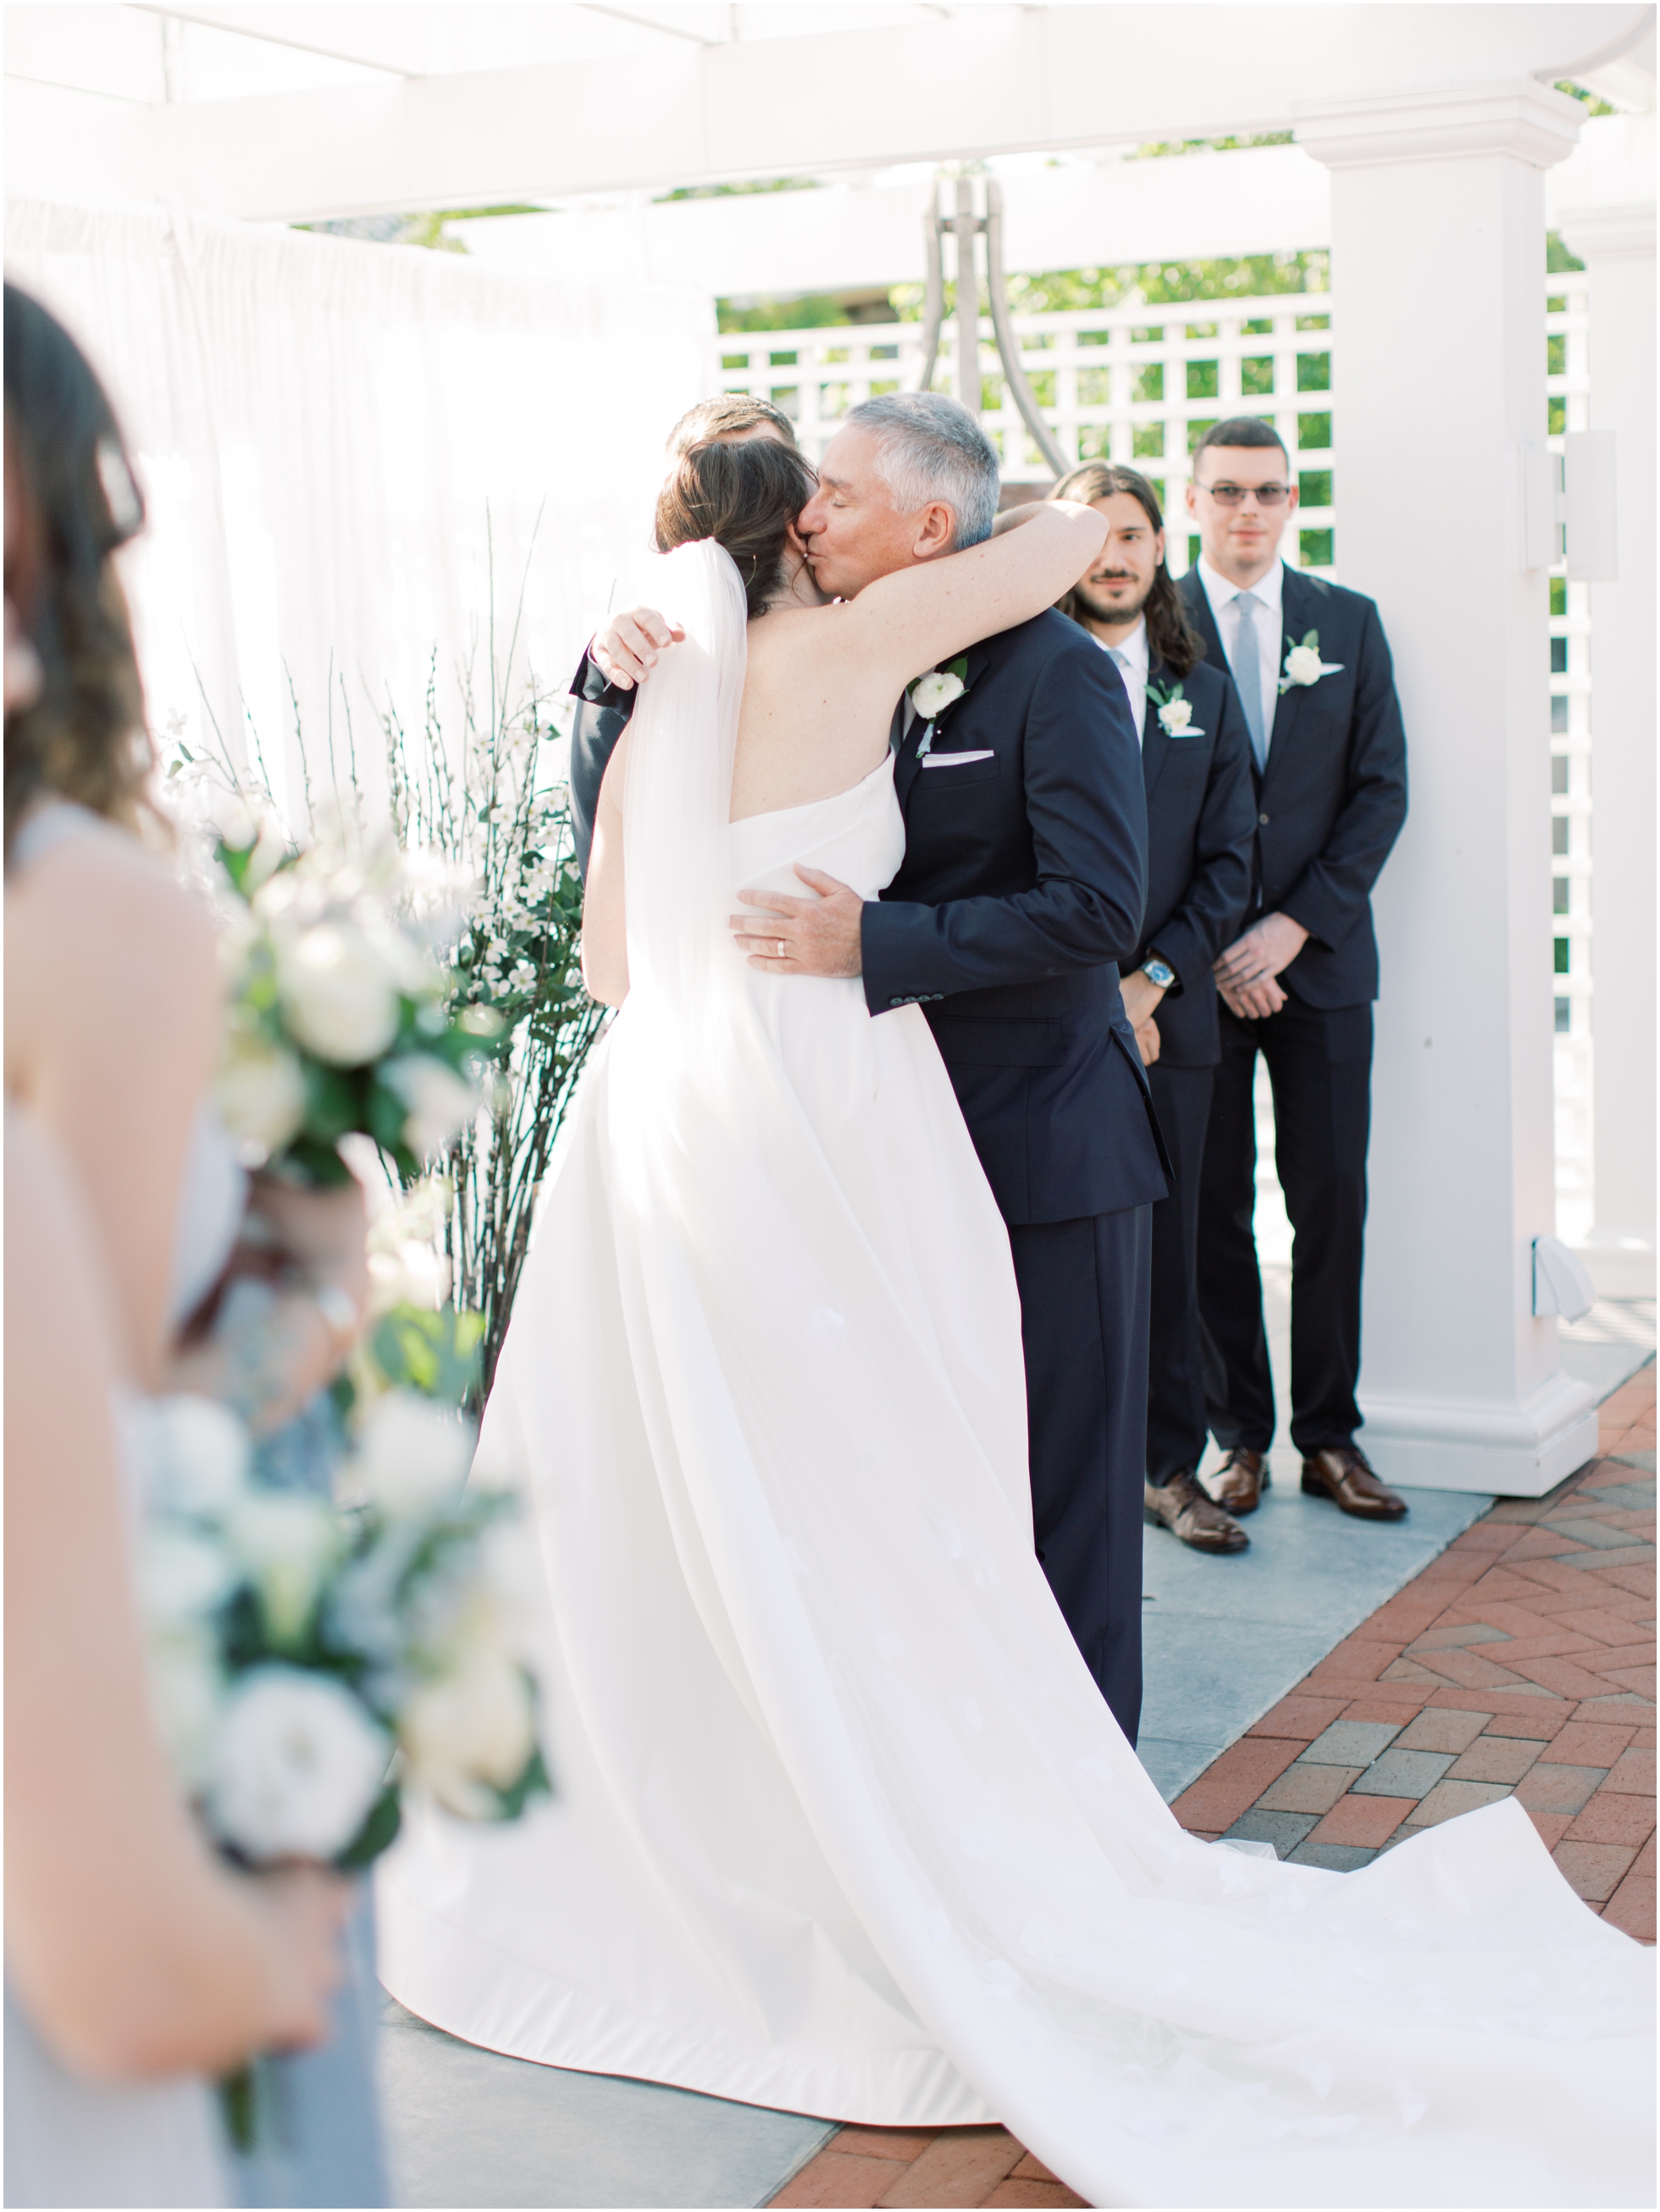 A Chesapeake Bay Wedding with the Most Stunning DIY Details